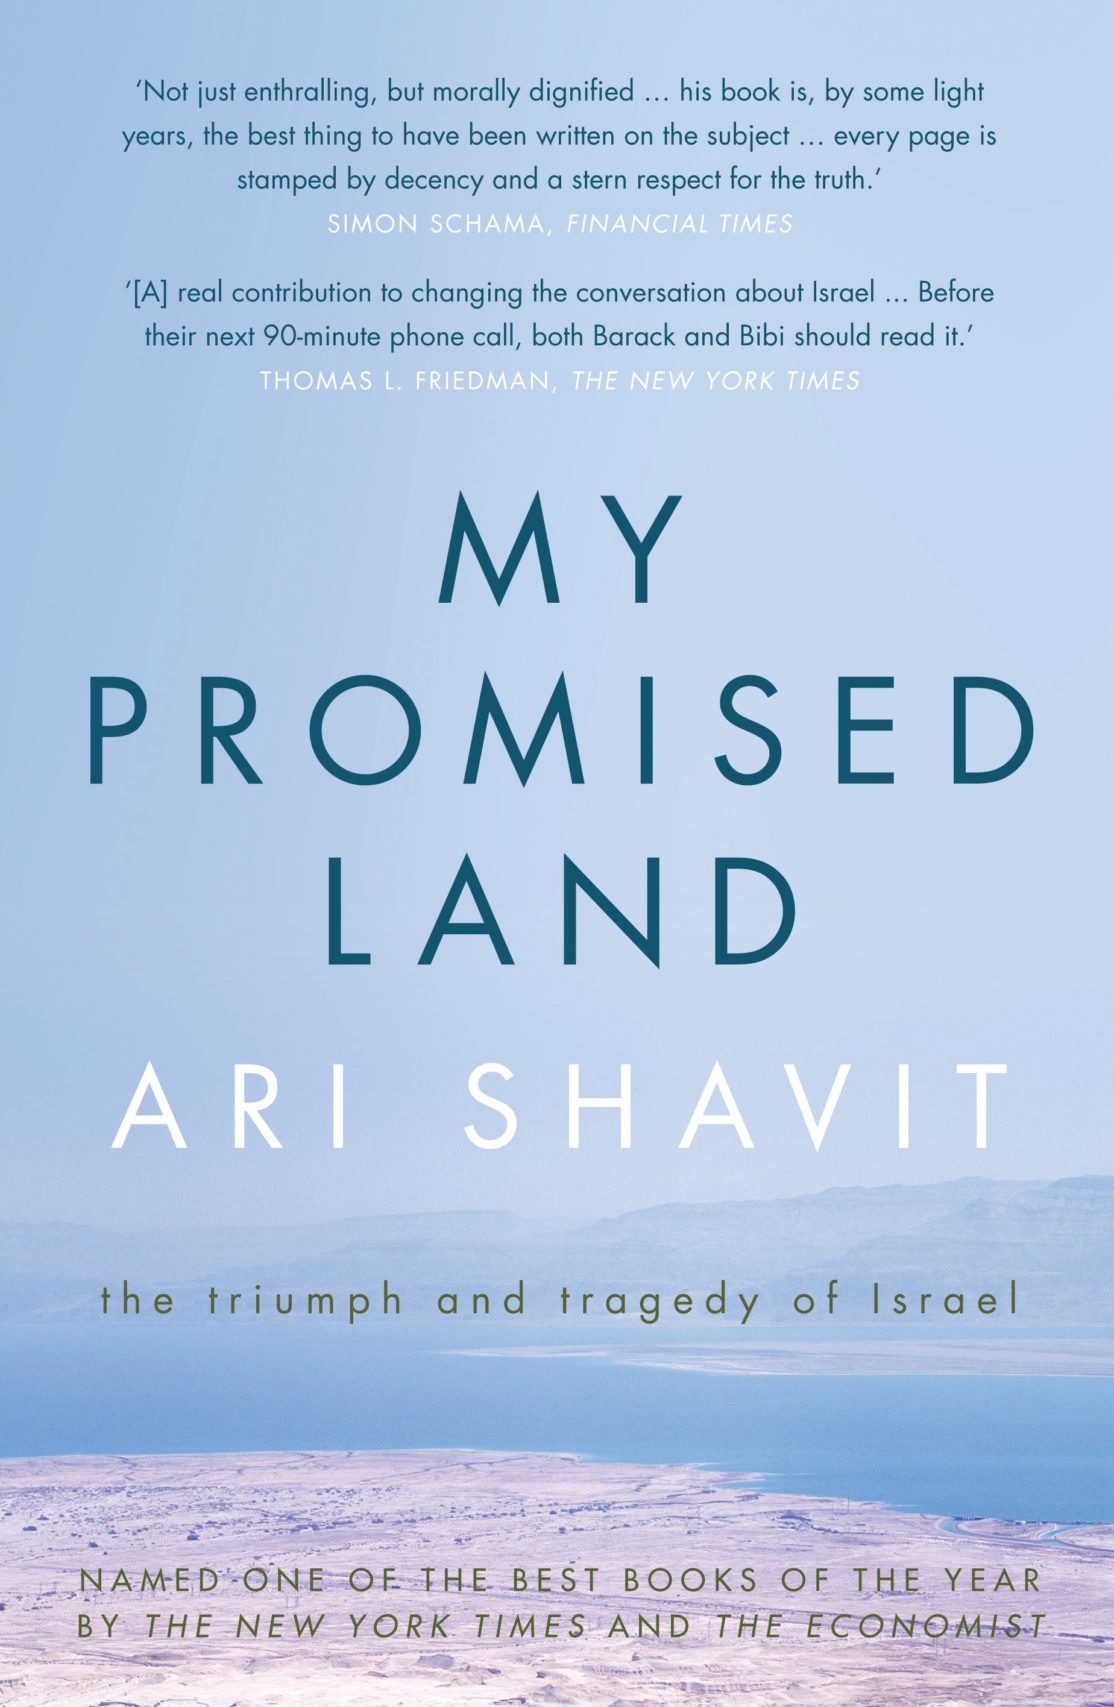 My Promised Land: The Triumph and Tragedy of Israel by Ari Shavit